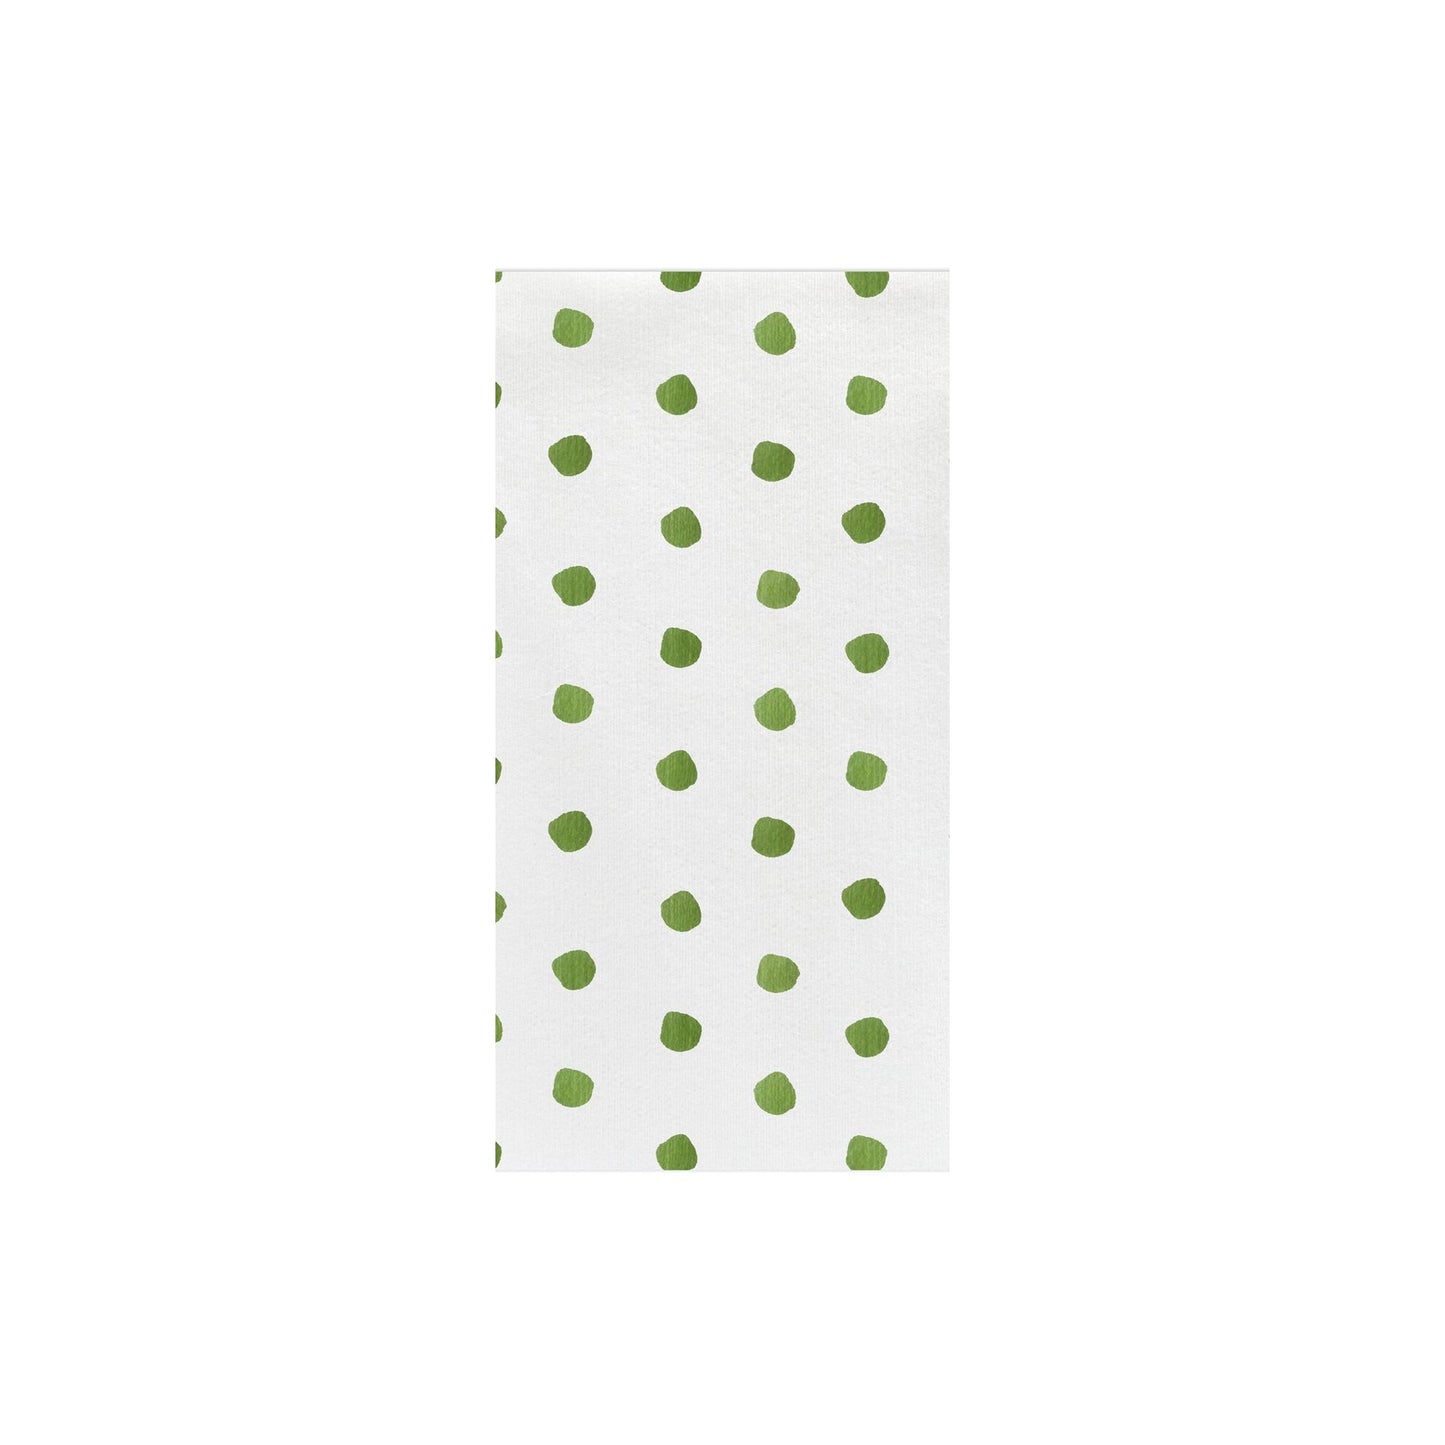 Papersoft Napkins Green Dot Guest Towels (Pack of 20) Home Decor Vietri   